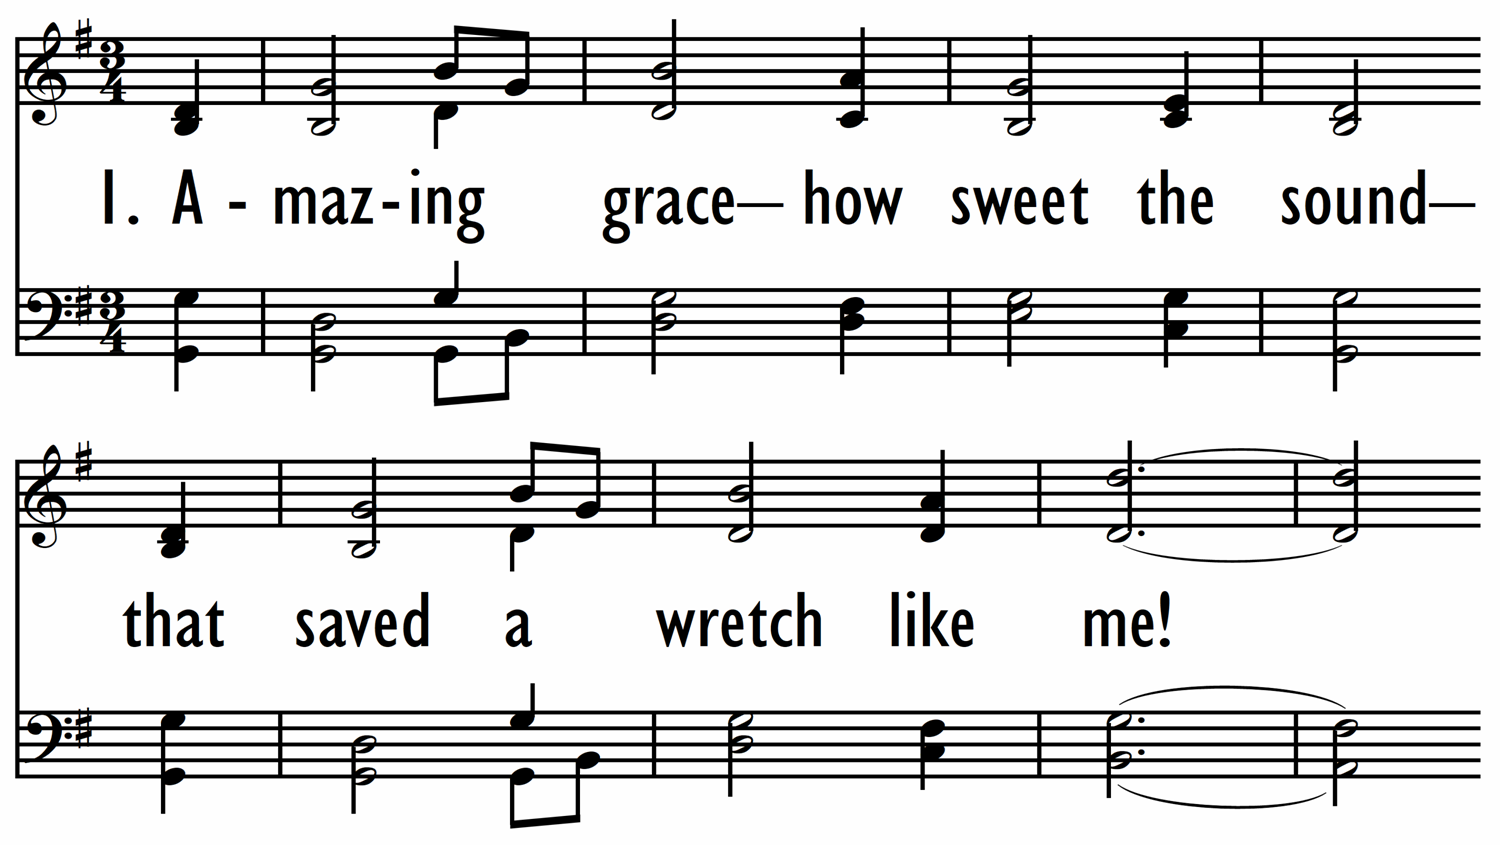 AMAZING GRACE - HOW SWEET THE SOUND-ppt